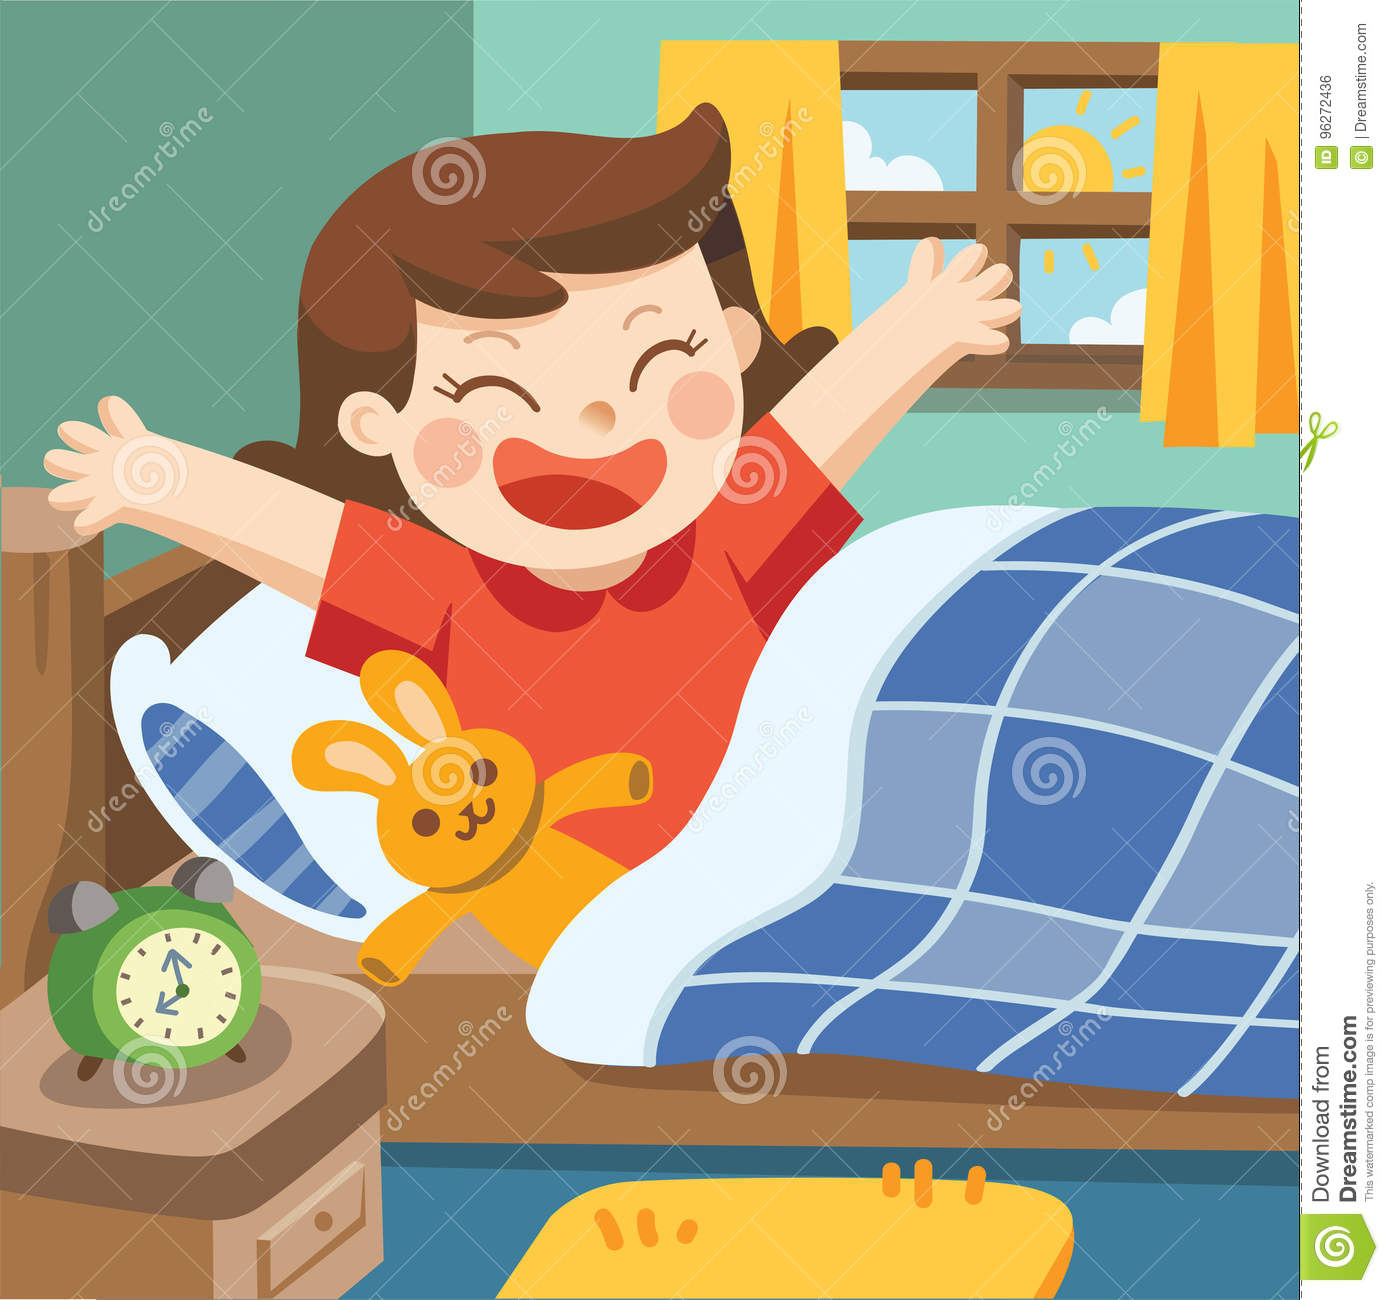 Wake Up Early In The Morning Clipart.